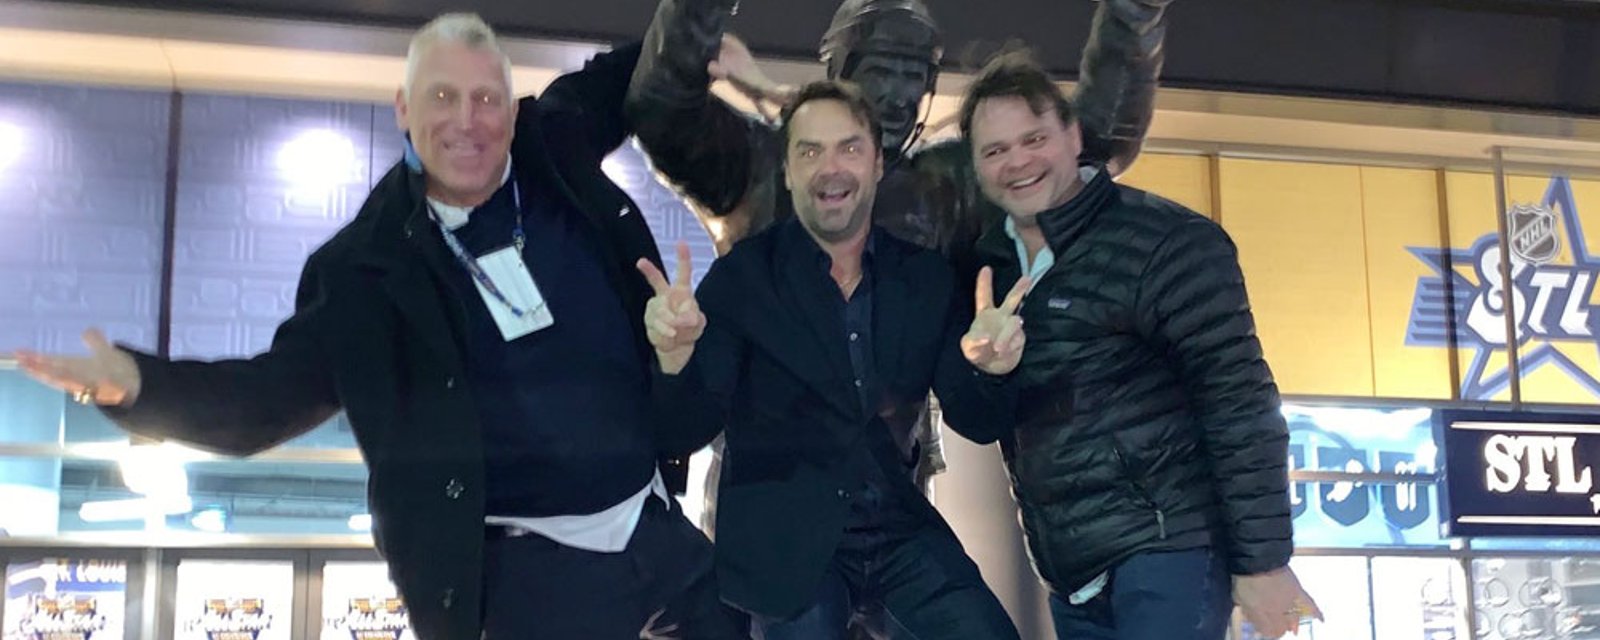 Curtis Joseph, Brett Hull and Garth Butcher get wild after the NHL All-Star Game!